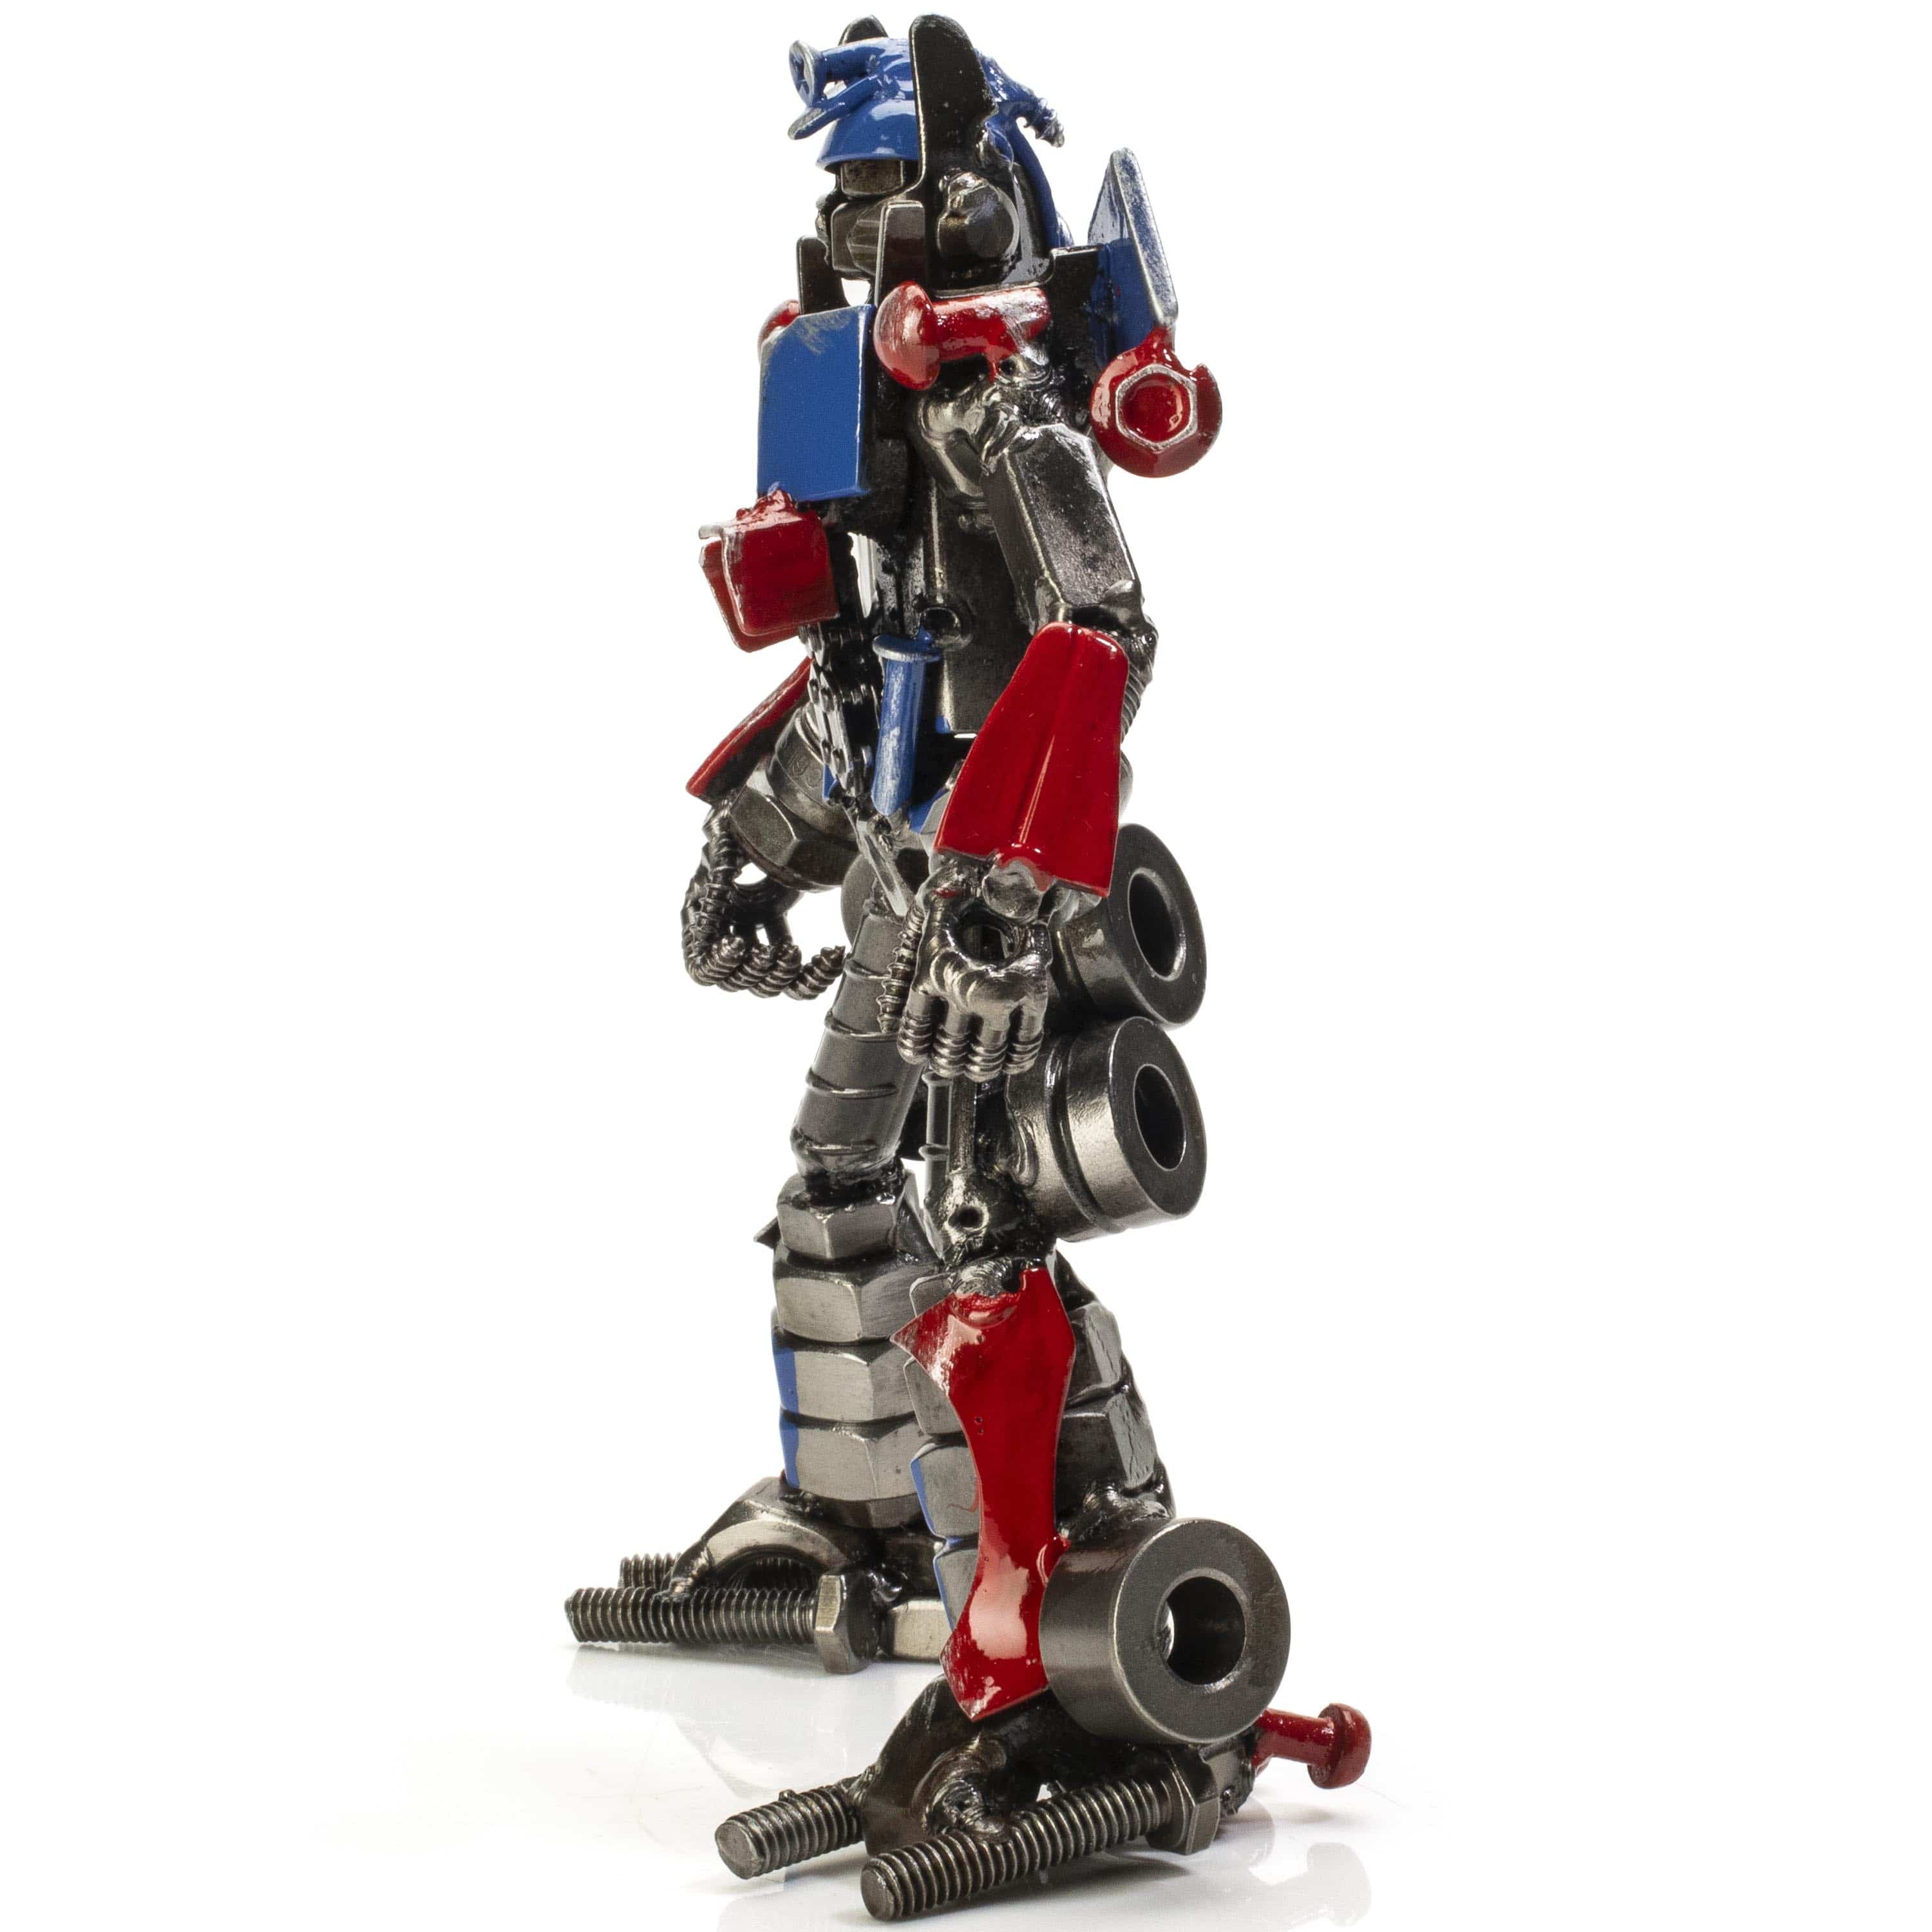 Kalifano Recycled Metal Art Optimus Prime Inspired Recycled Metal Sculpture RMS-450OPA-N